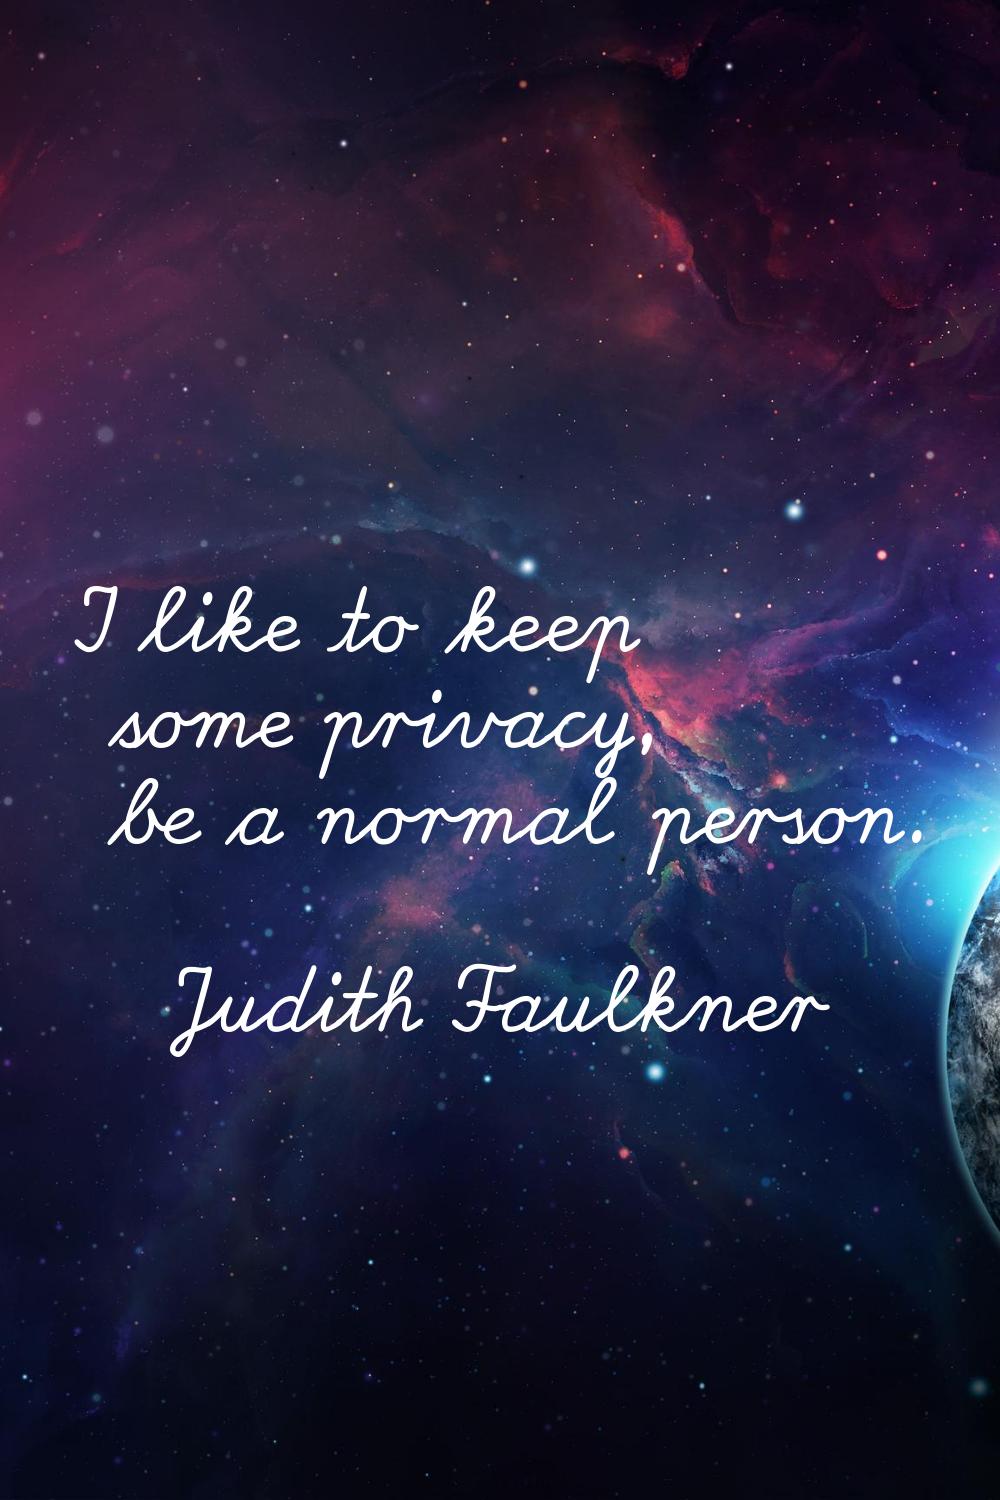 I like to keep some privacy, be a normal person.